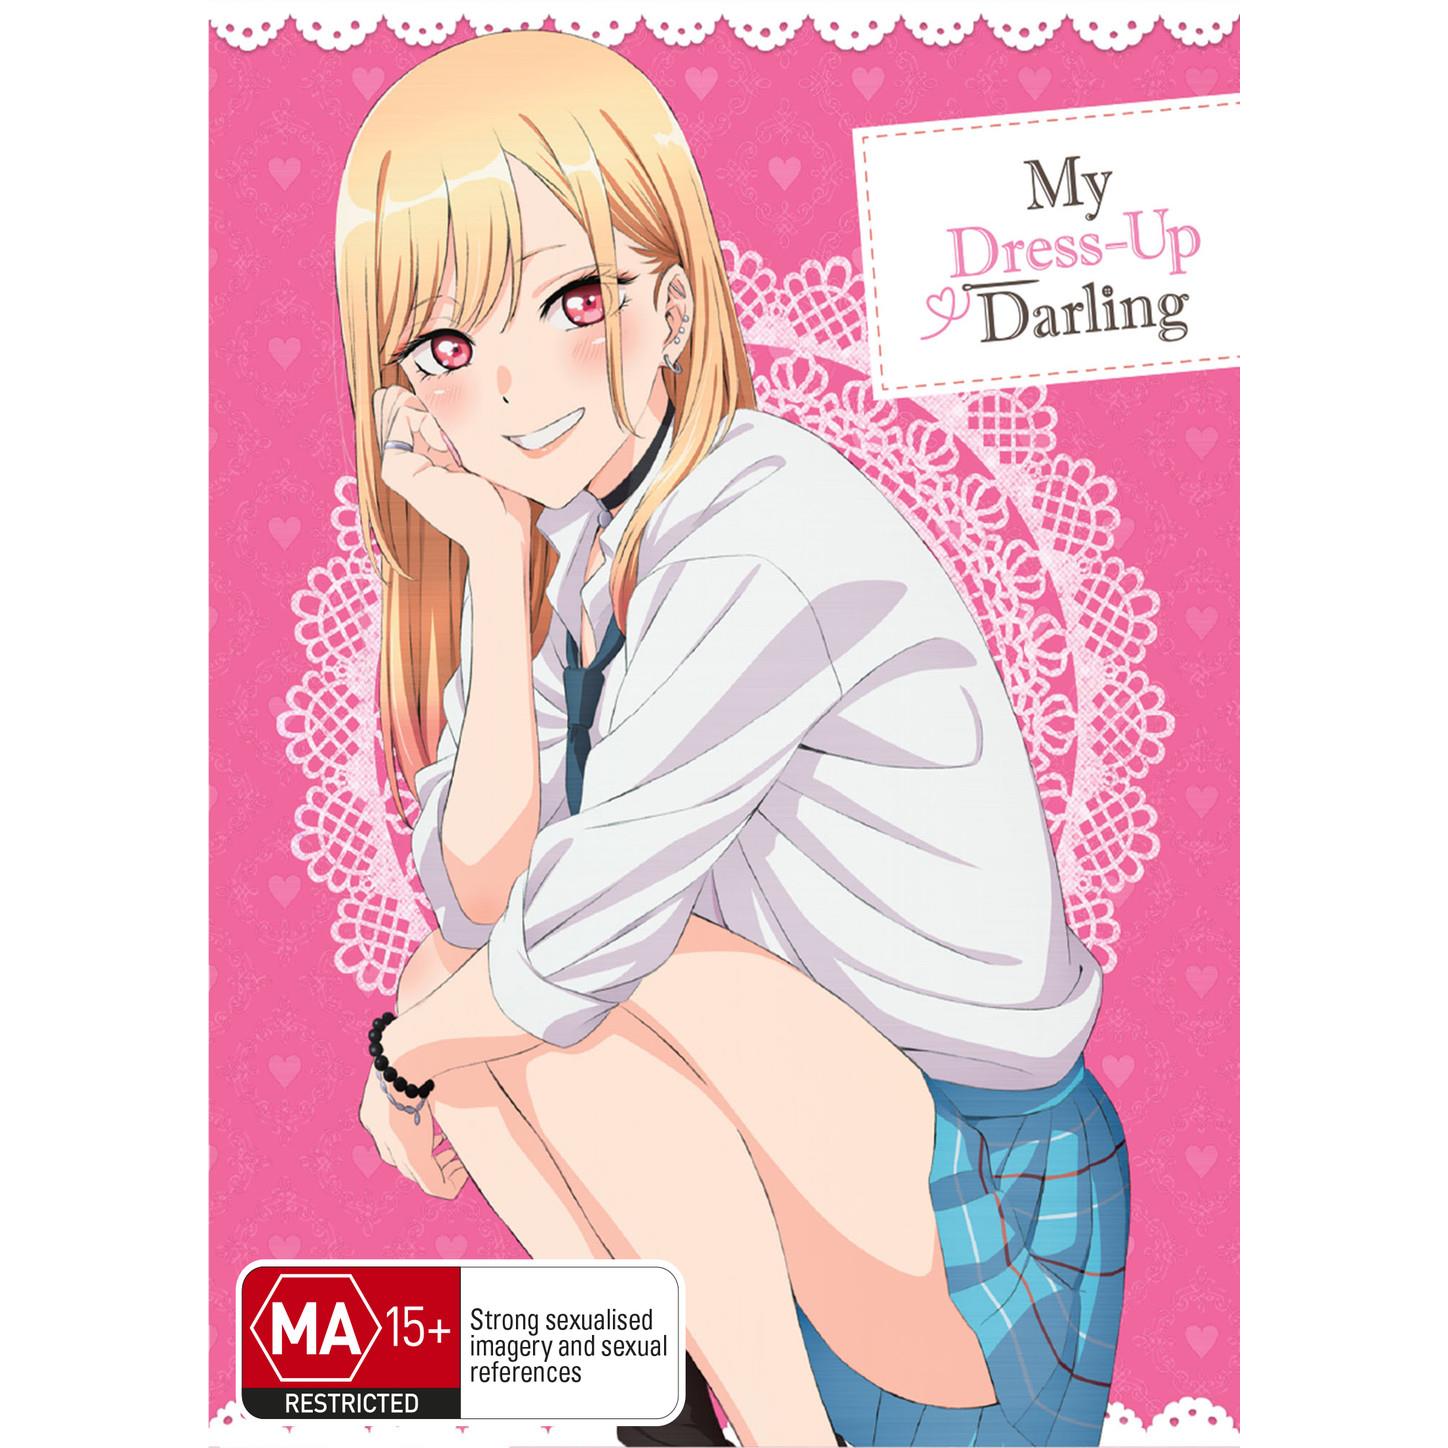 my dress up darling - the complete season (limited edition)